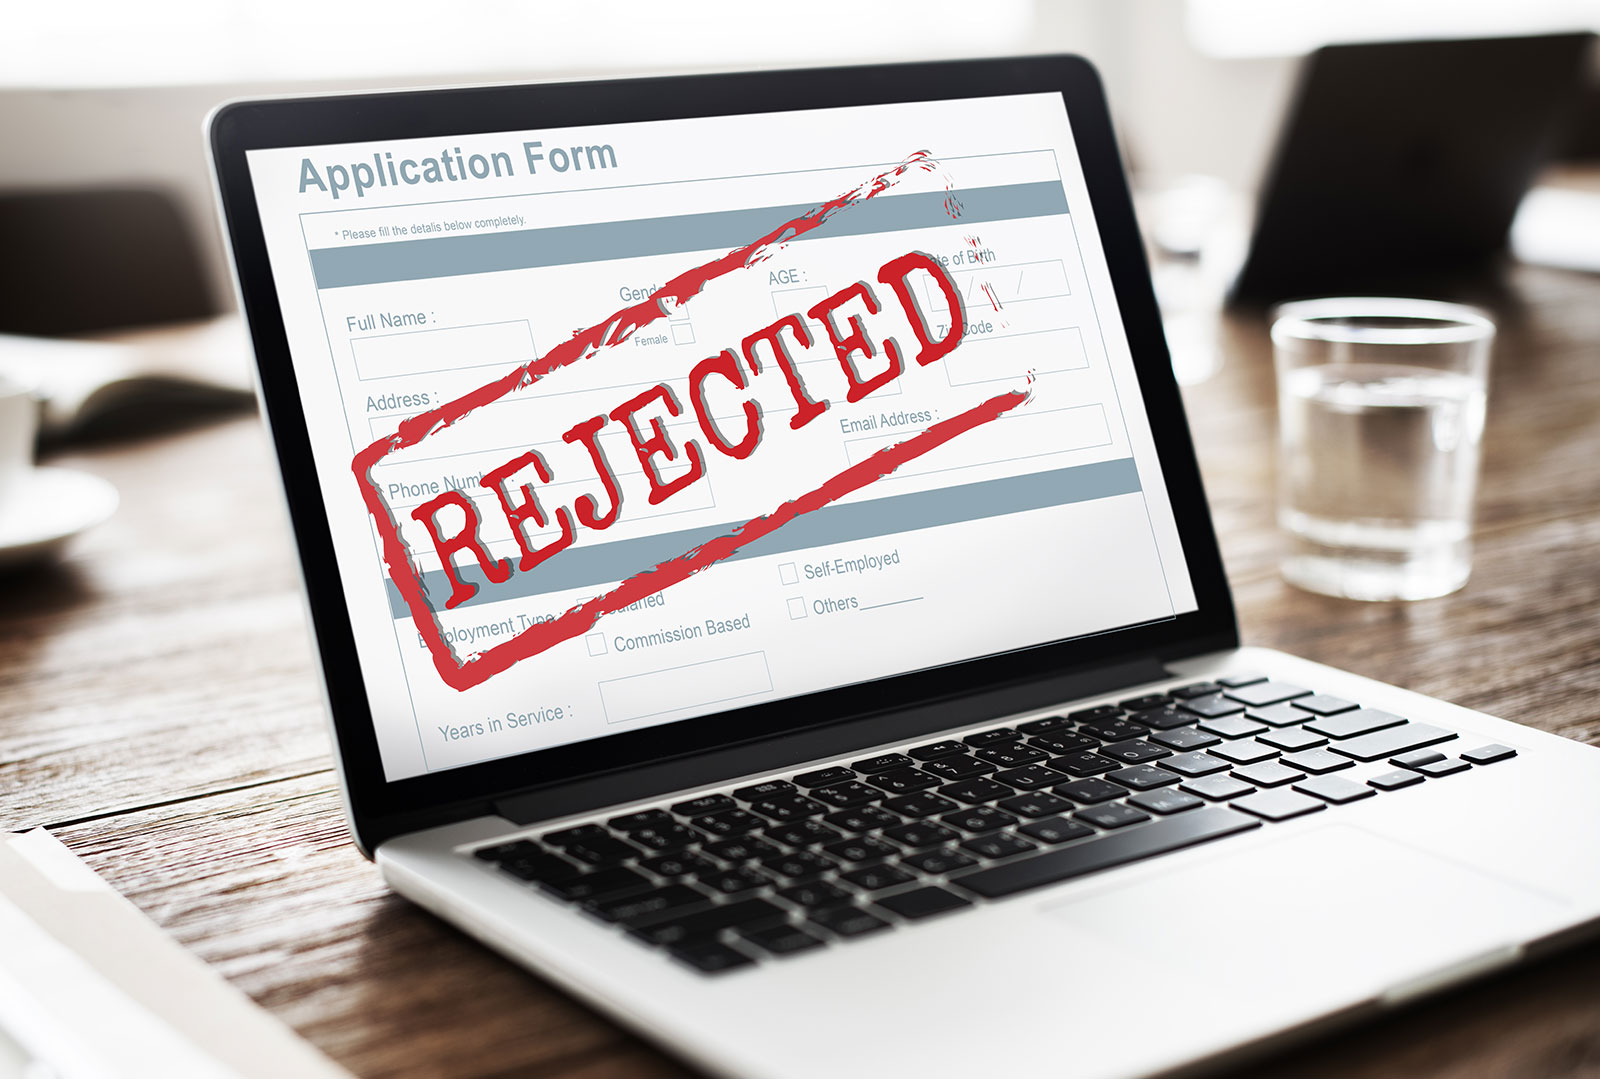 Why was my ITIN application rejected? 1